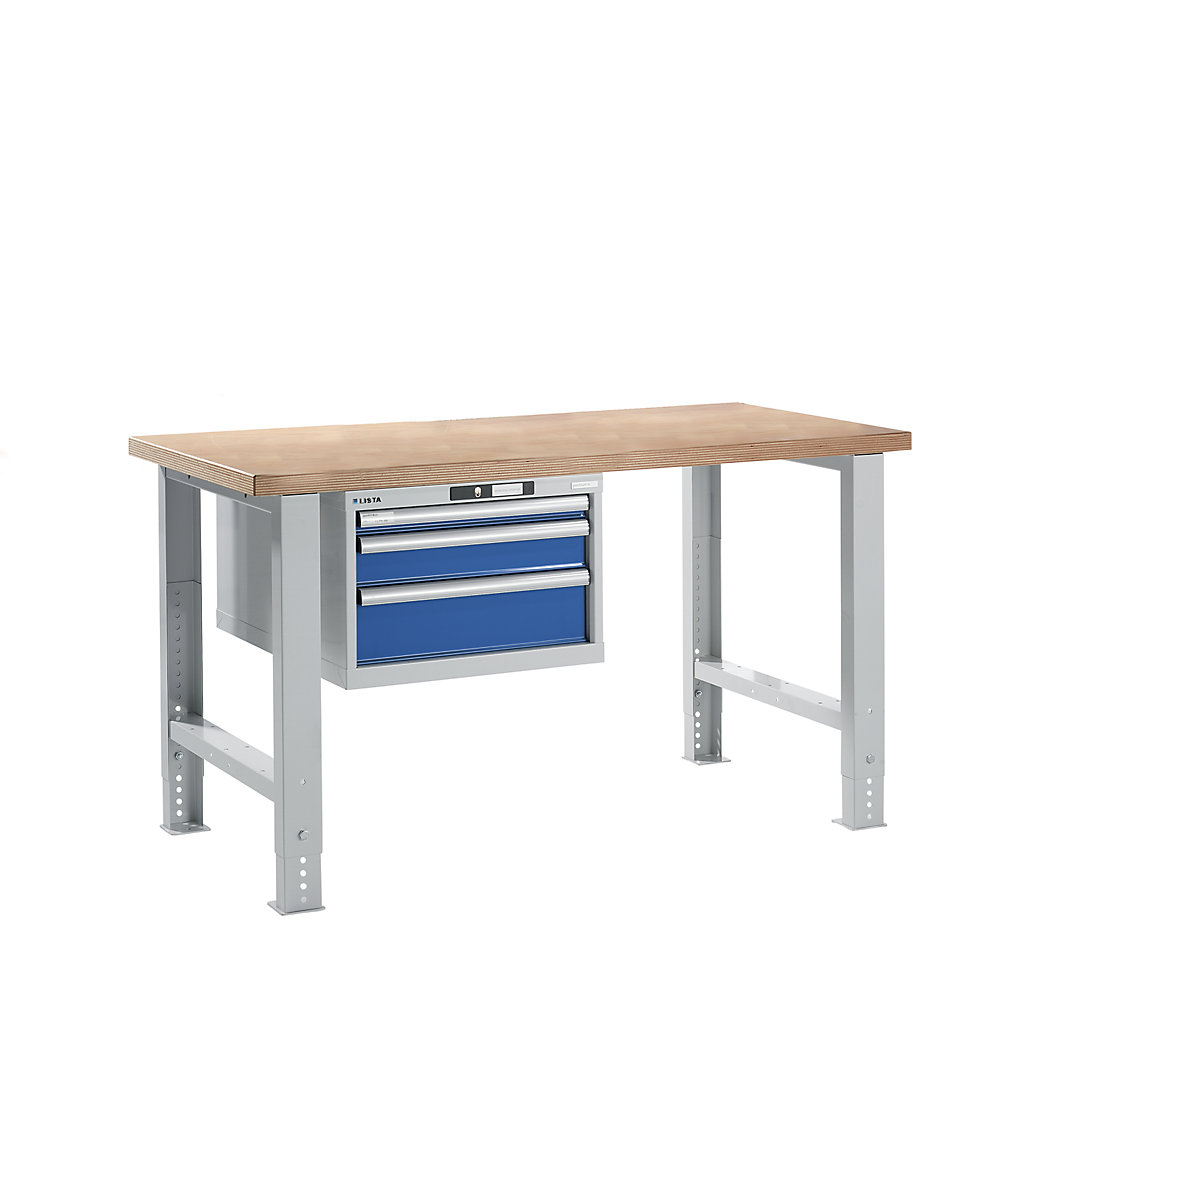 Modular workbench – LISTA, height 740 – 1090 mm, suspended drawer unit, 3 drawers, gentian blue, table width 1500 mm-8